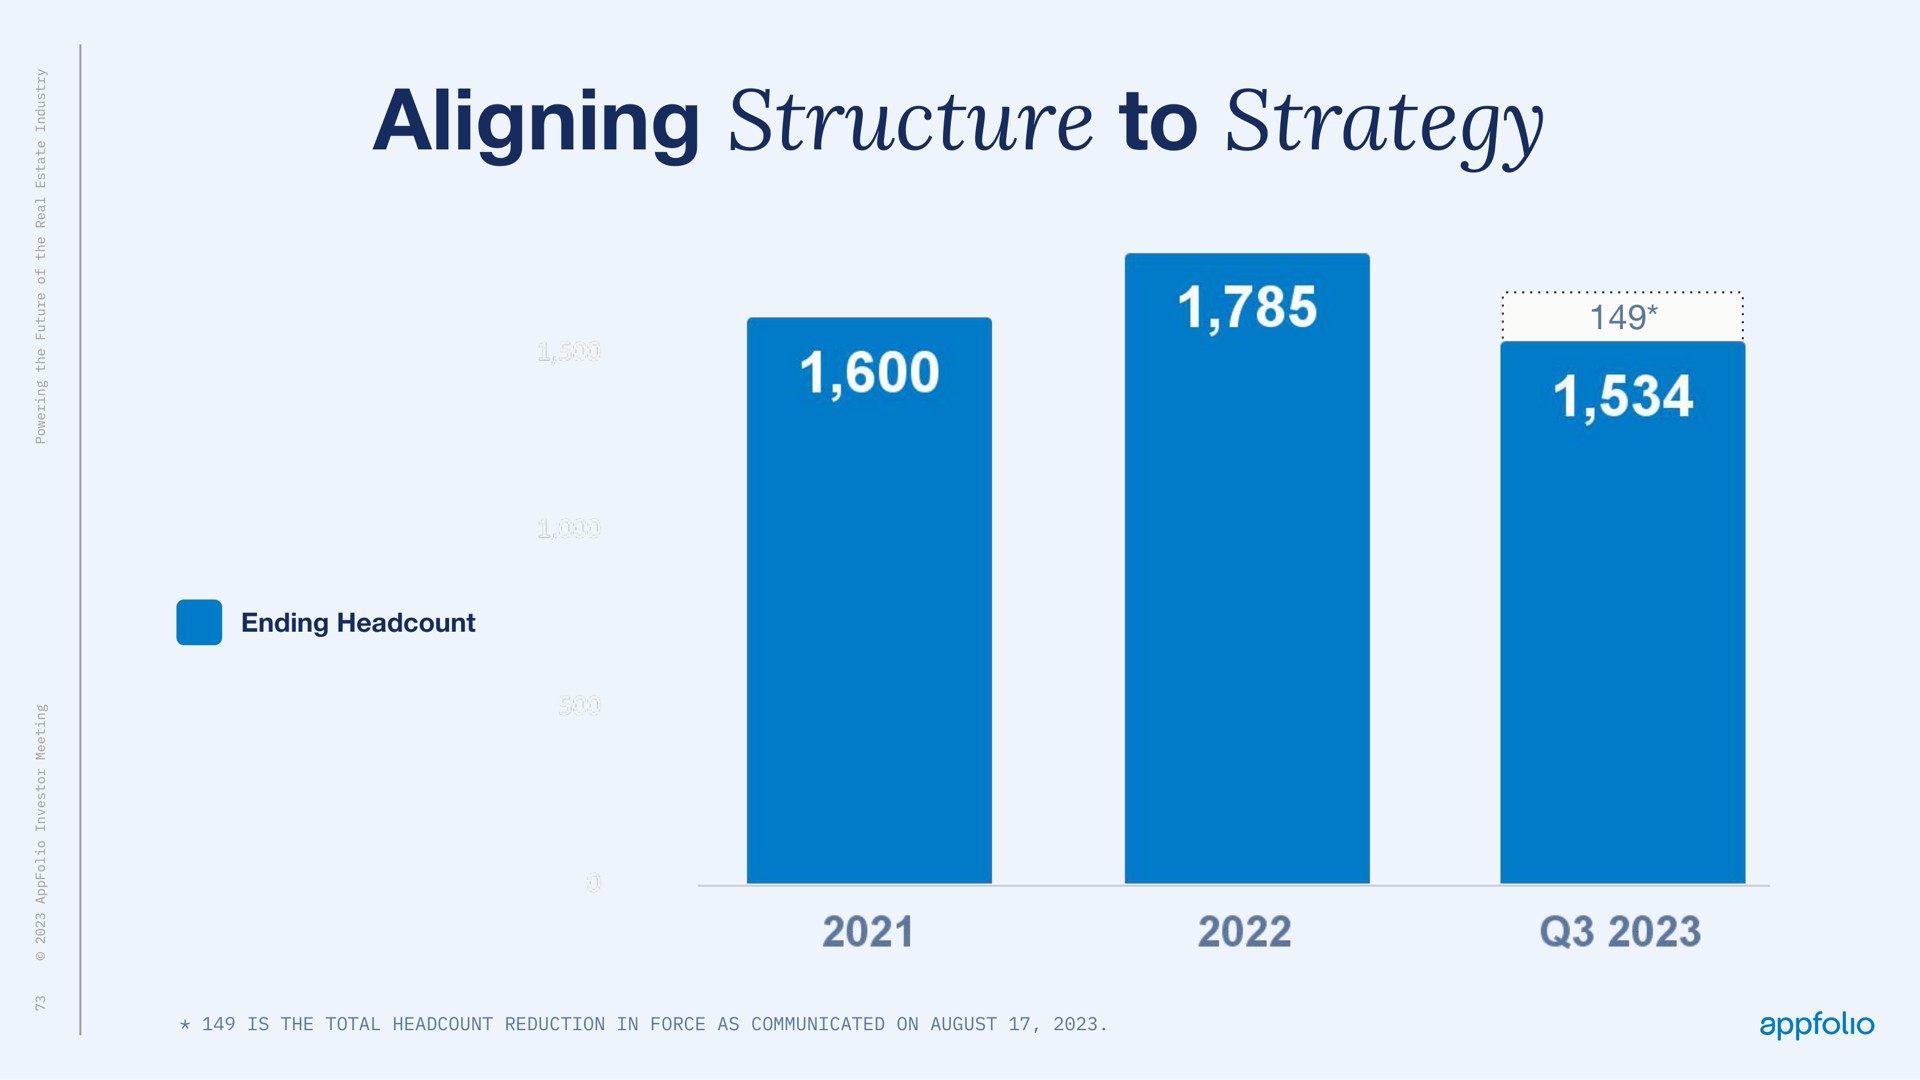 aligning structure to strategy | AppFolio